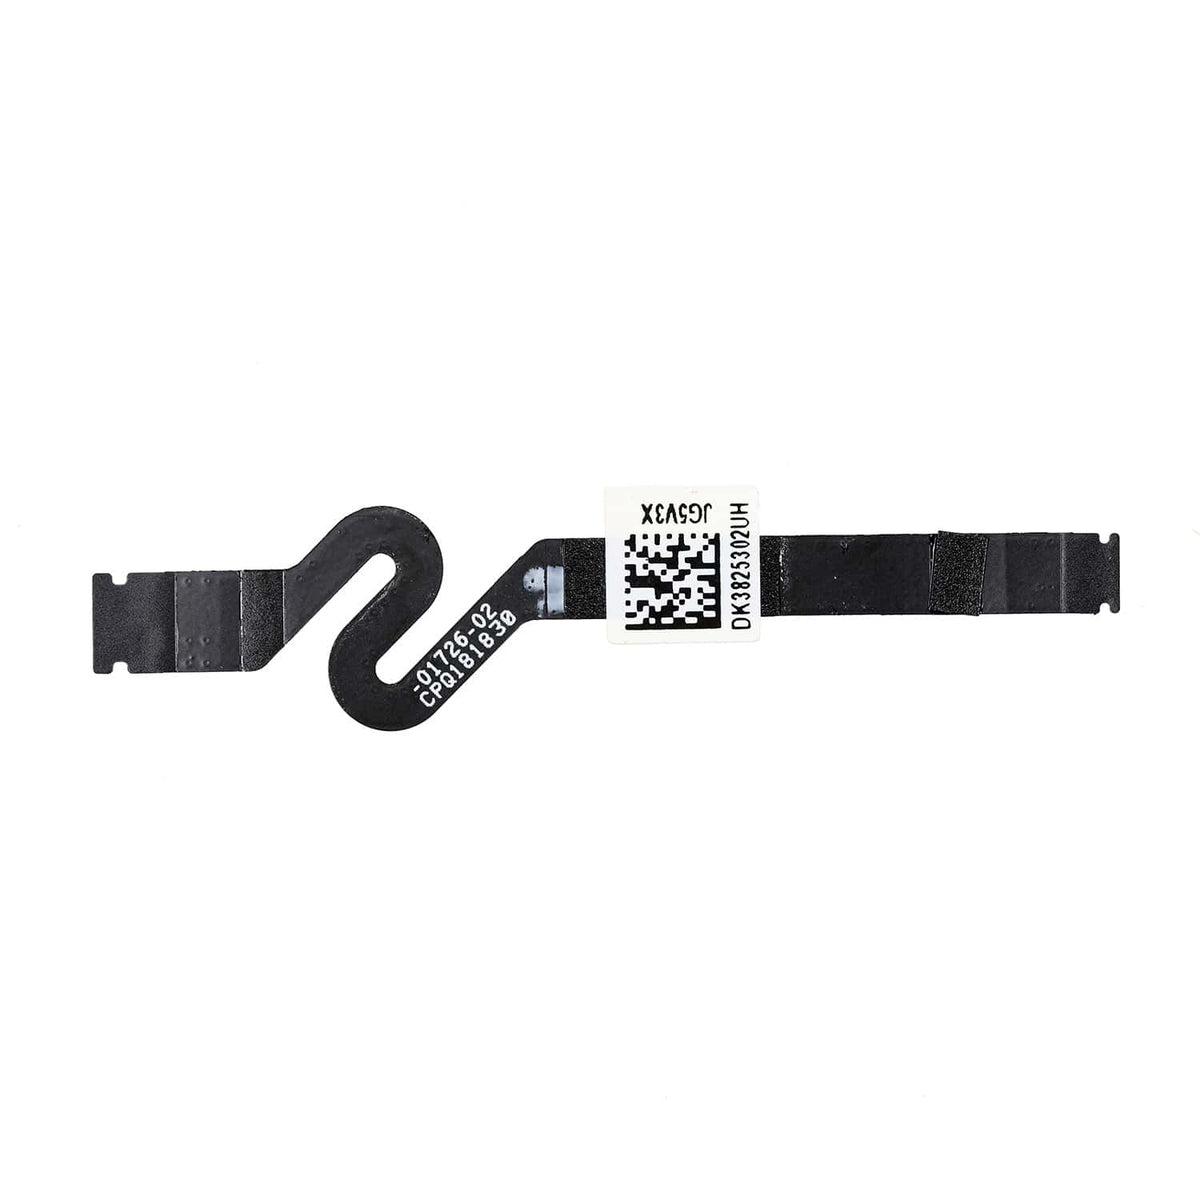 BATTERY CONNECT FLEX CABLE FOR MACBOOK PRO A1989 (MID 2018)